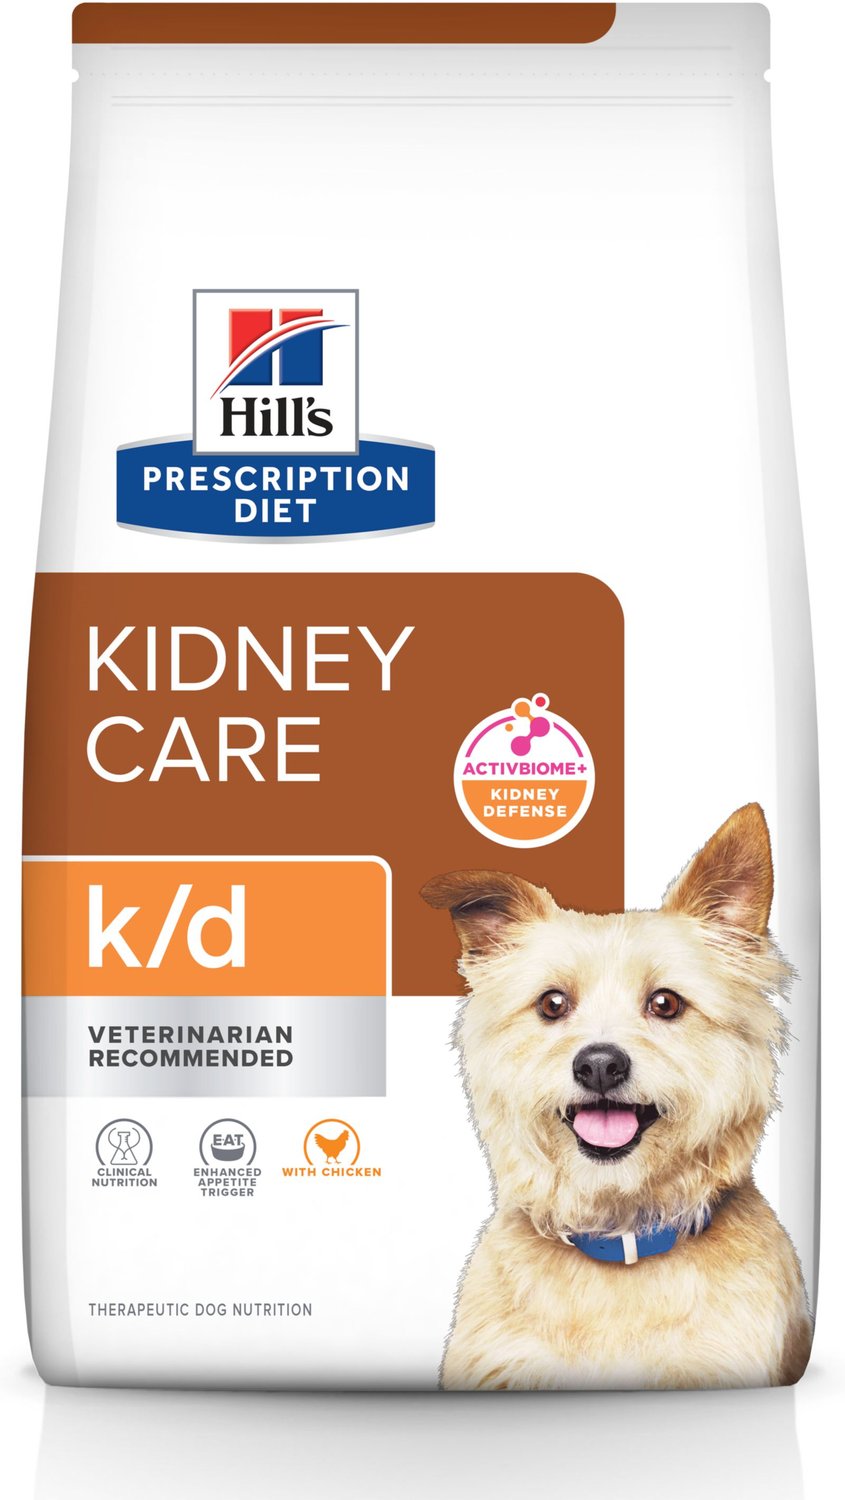 Kidney Care with Chicken Dry Dog Food 